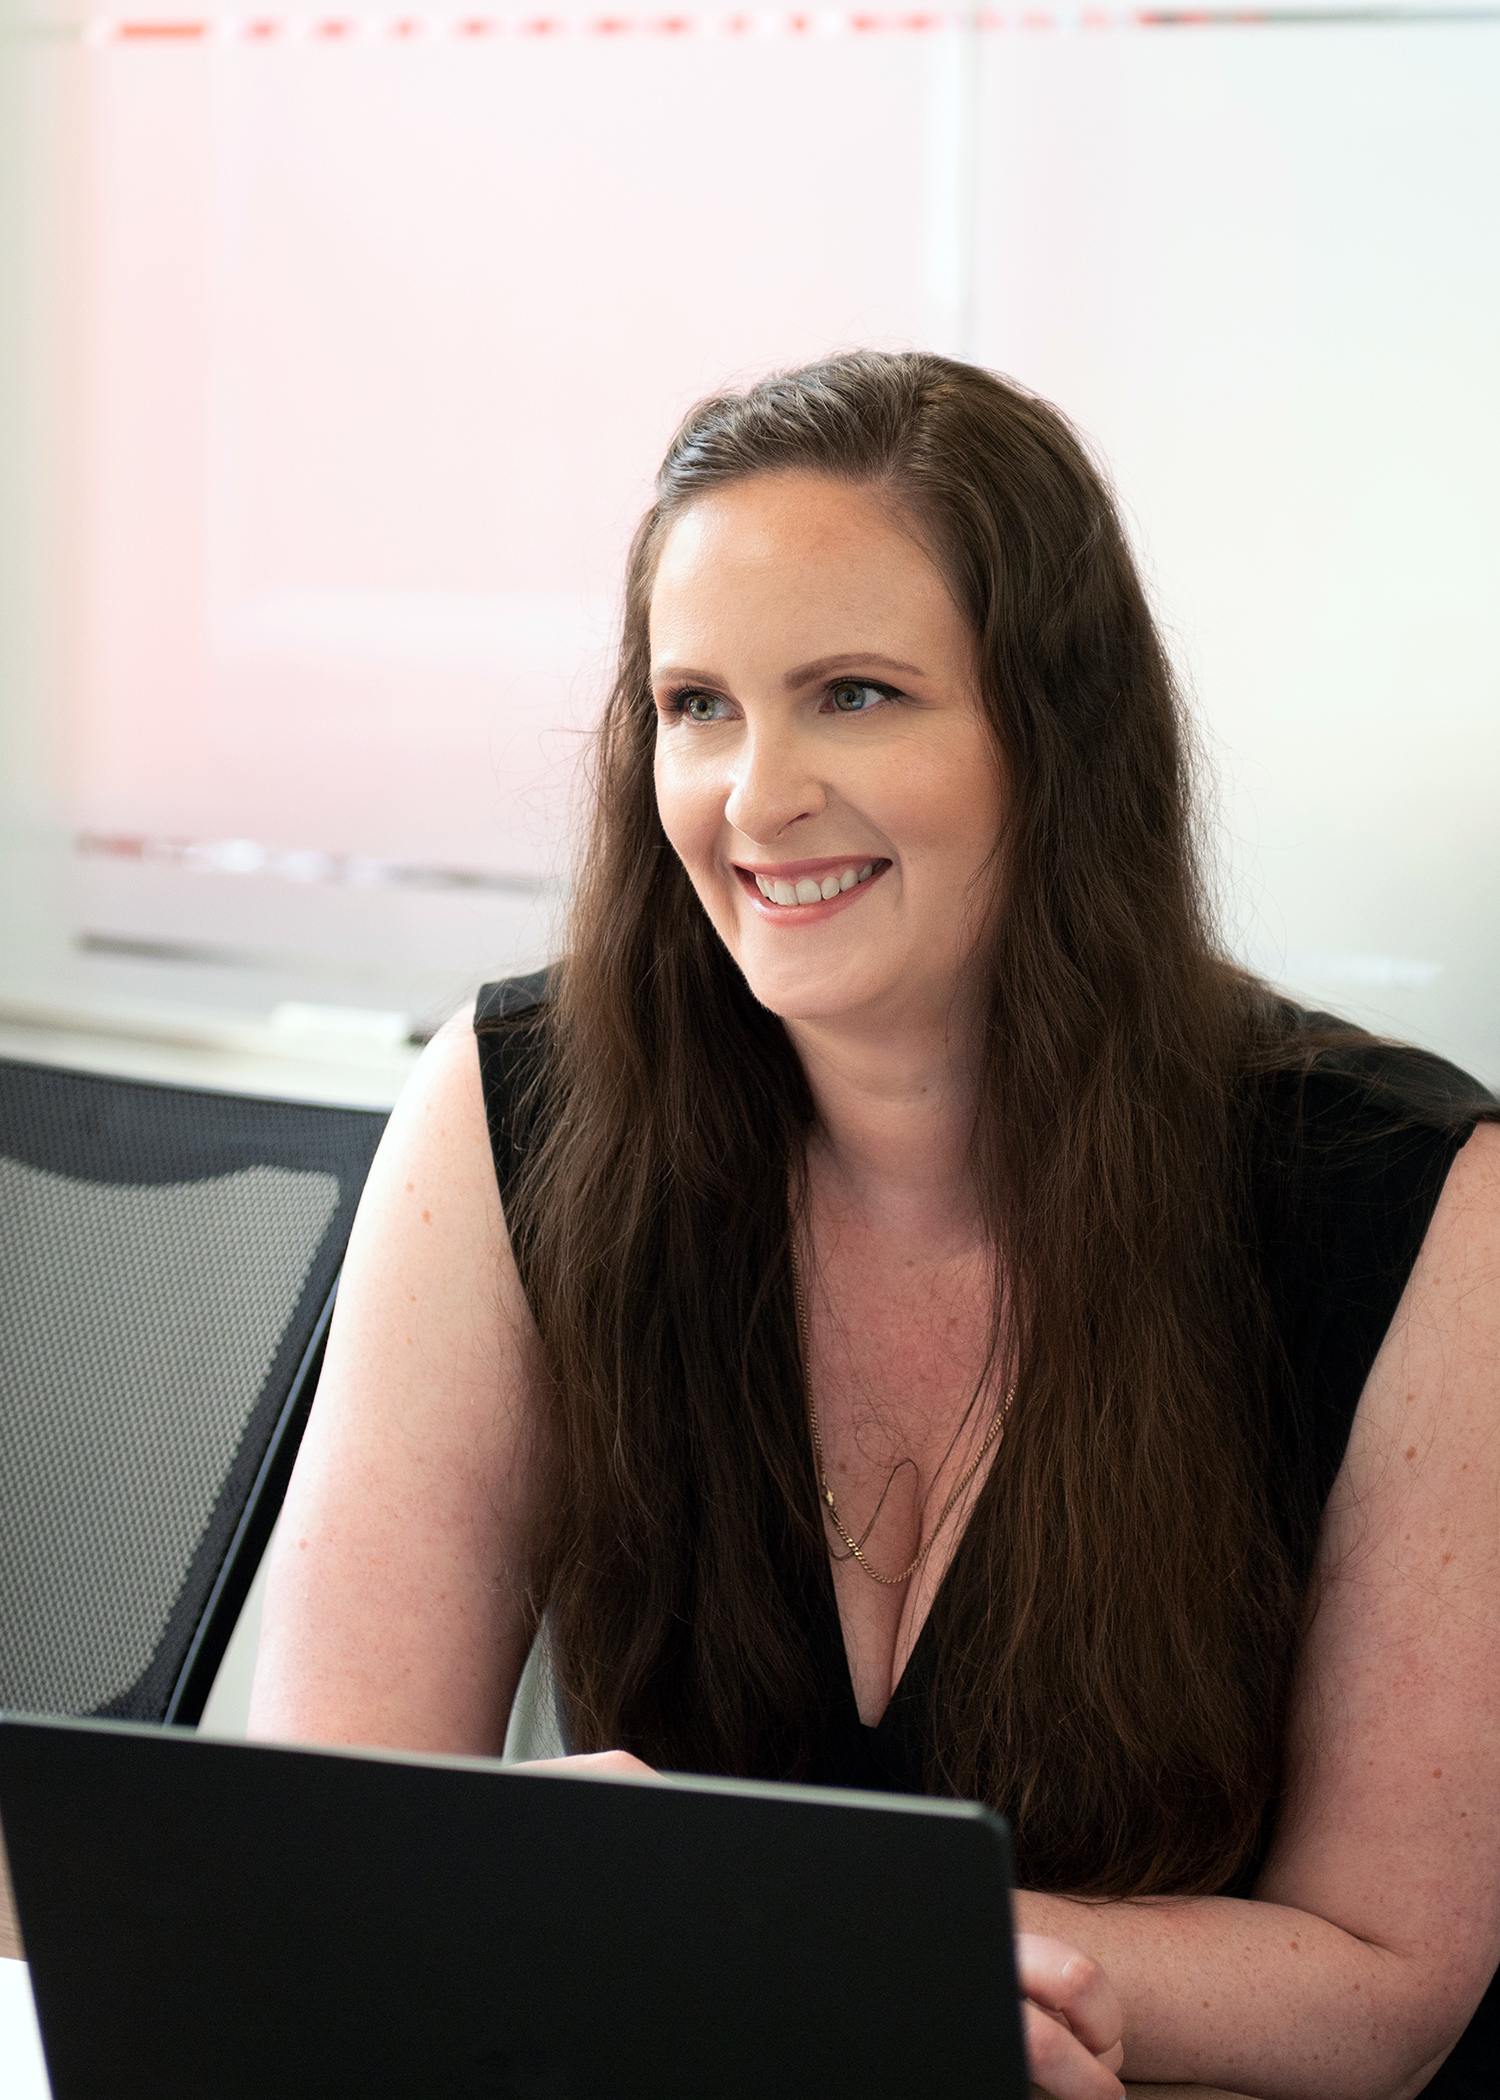 ‘It’s interesting, challenging and stretches you’ - why Helen loves HR